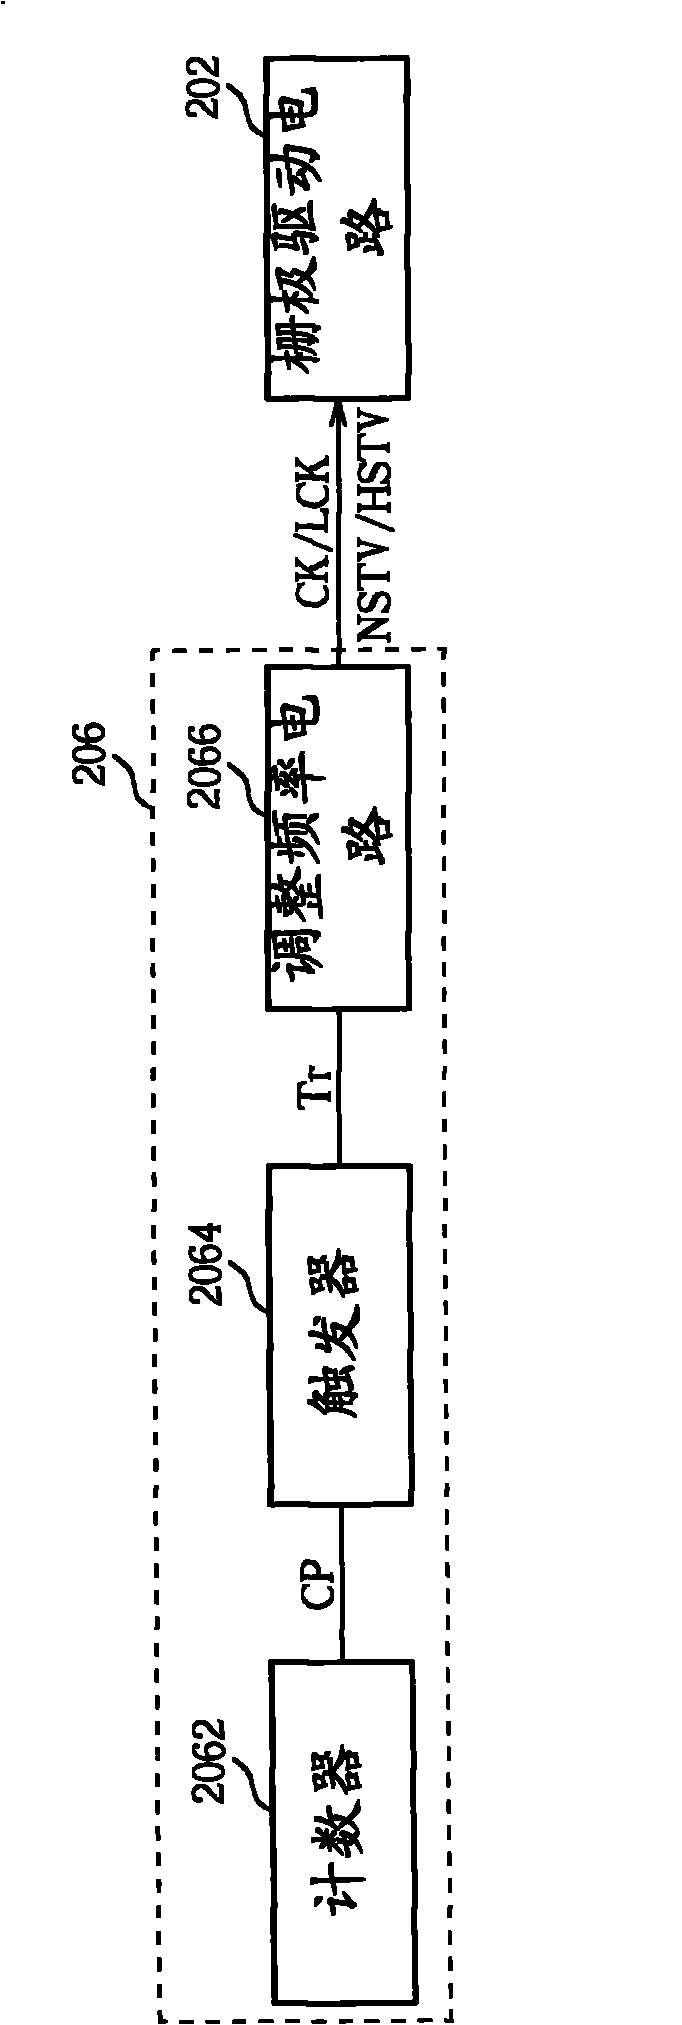 Liquid crystal driving device and sequential control circuit and method for improving startup delay